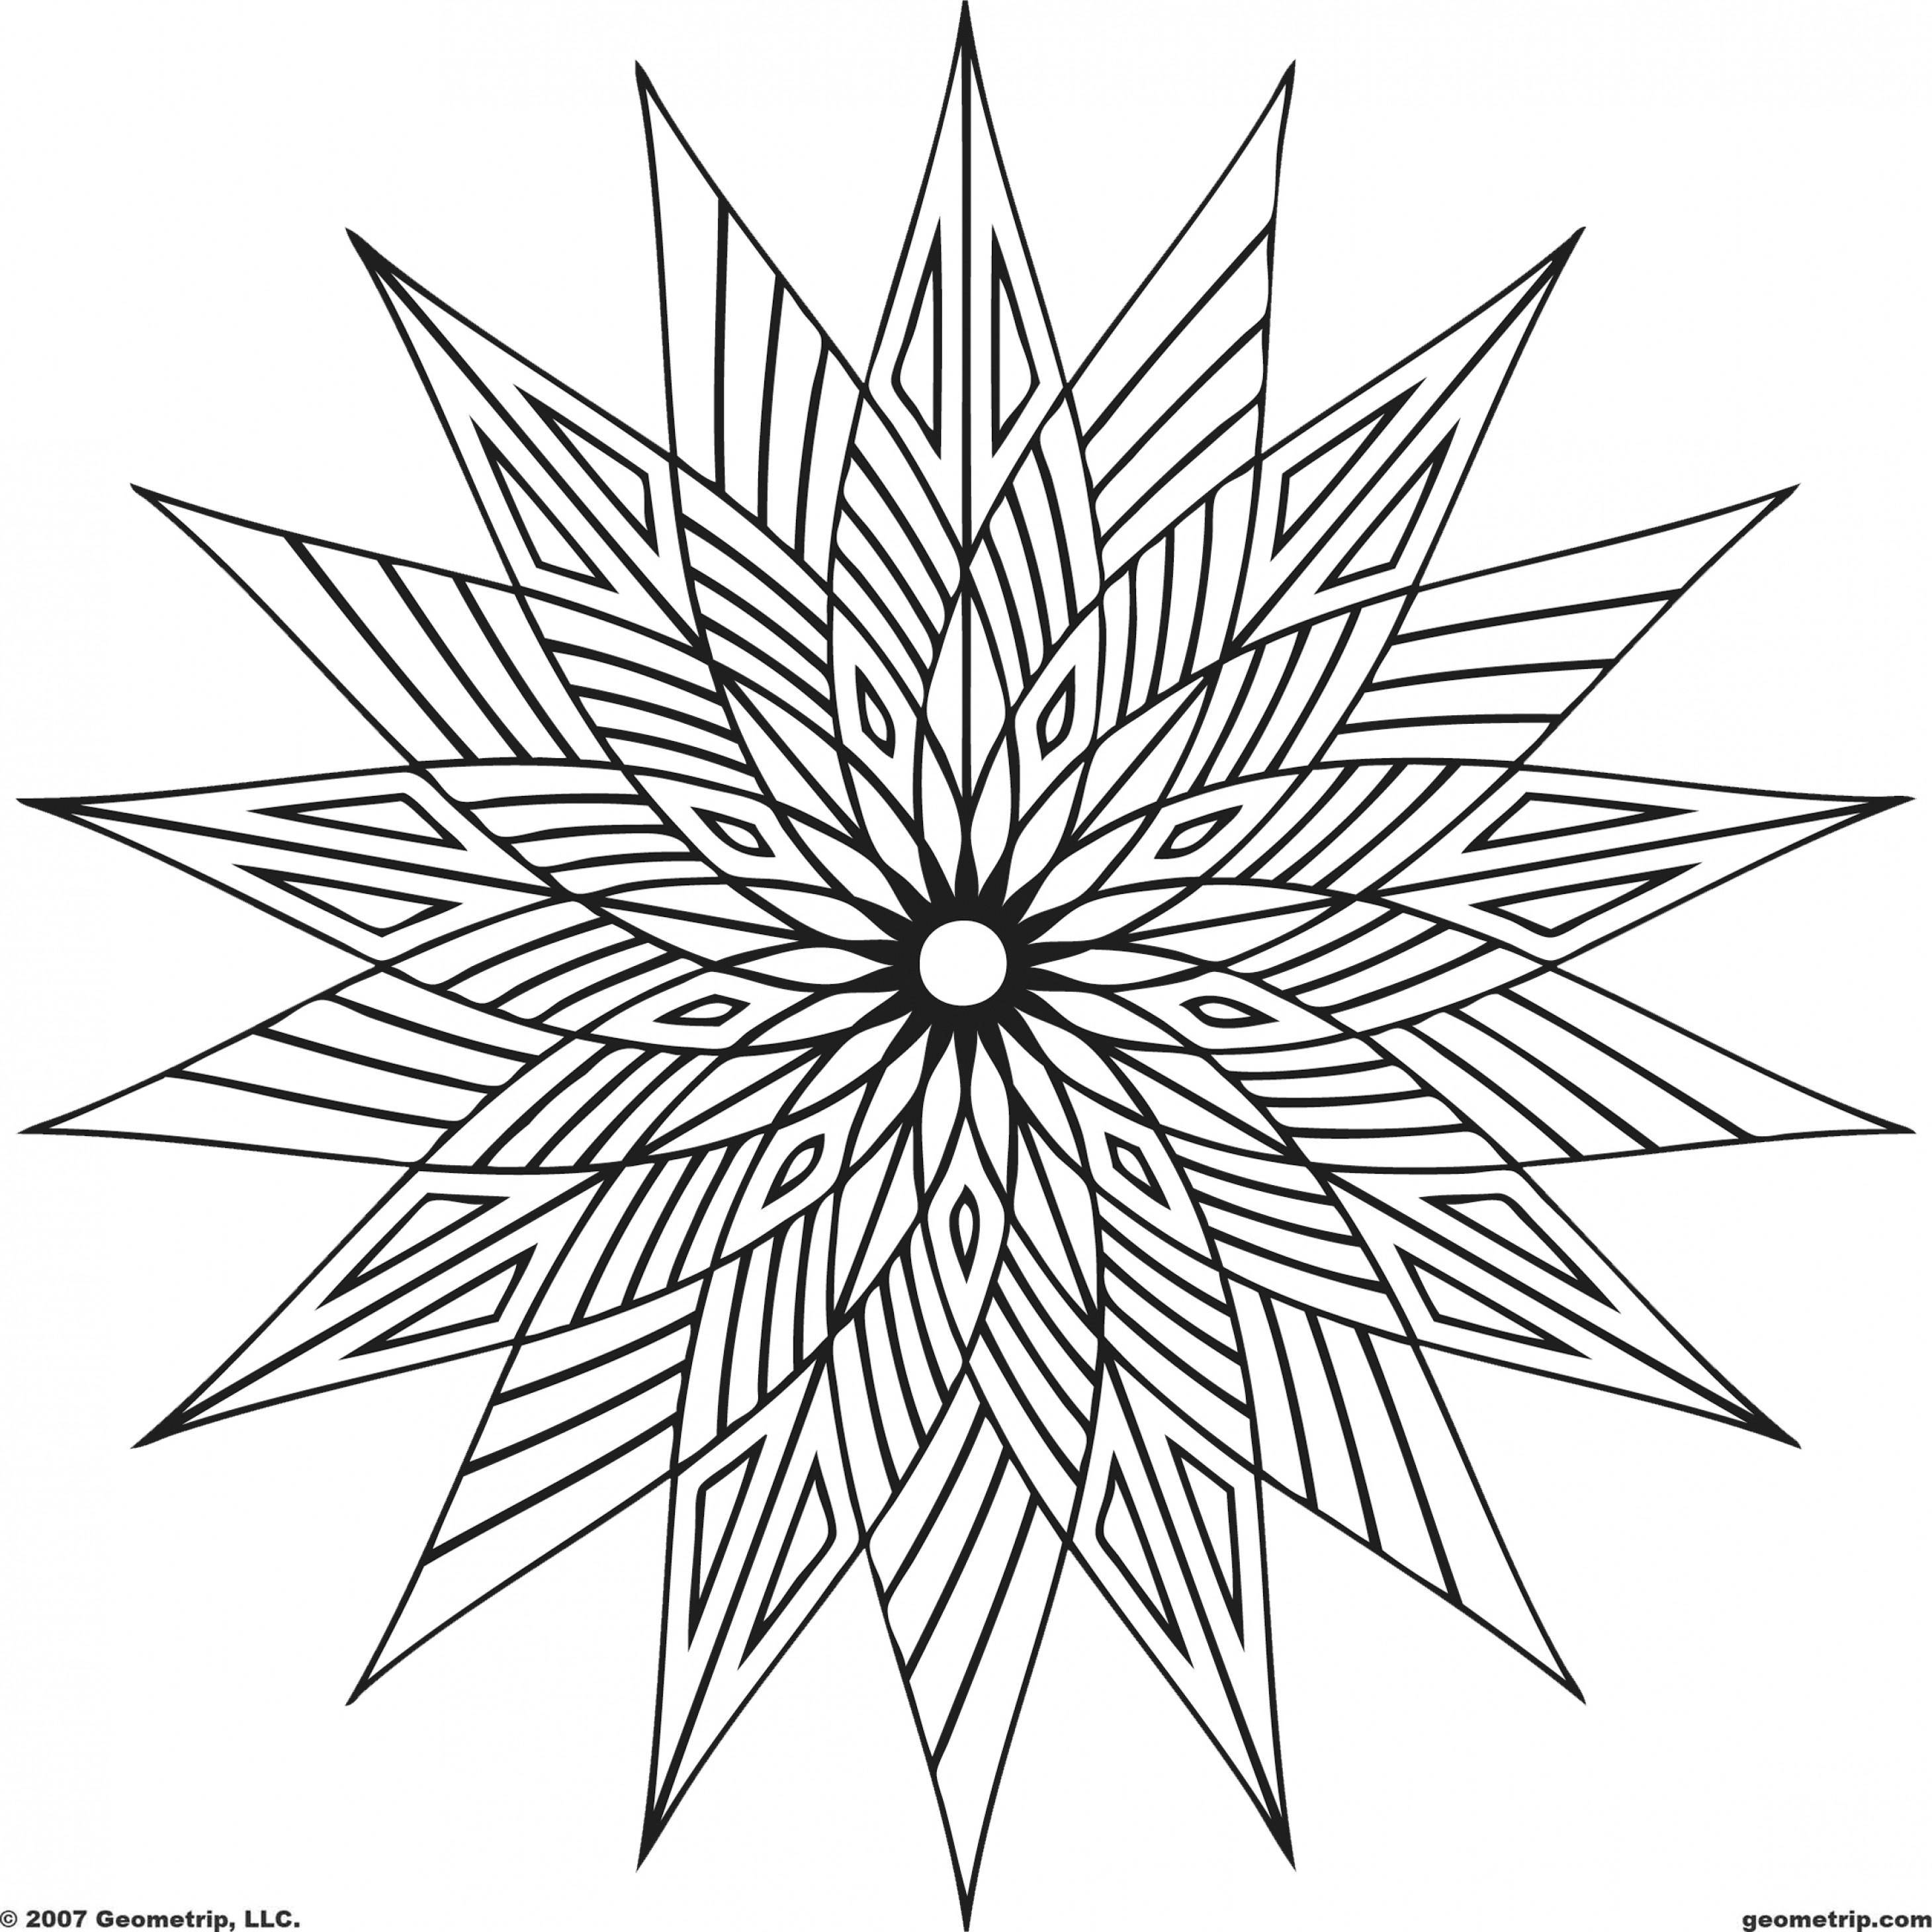 Coloring Star flower. Category Patterns. Tags:  Patterns, flower.